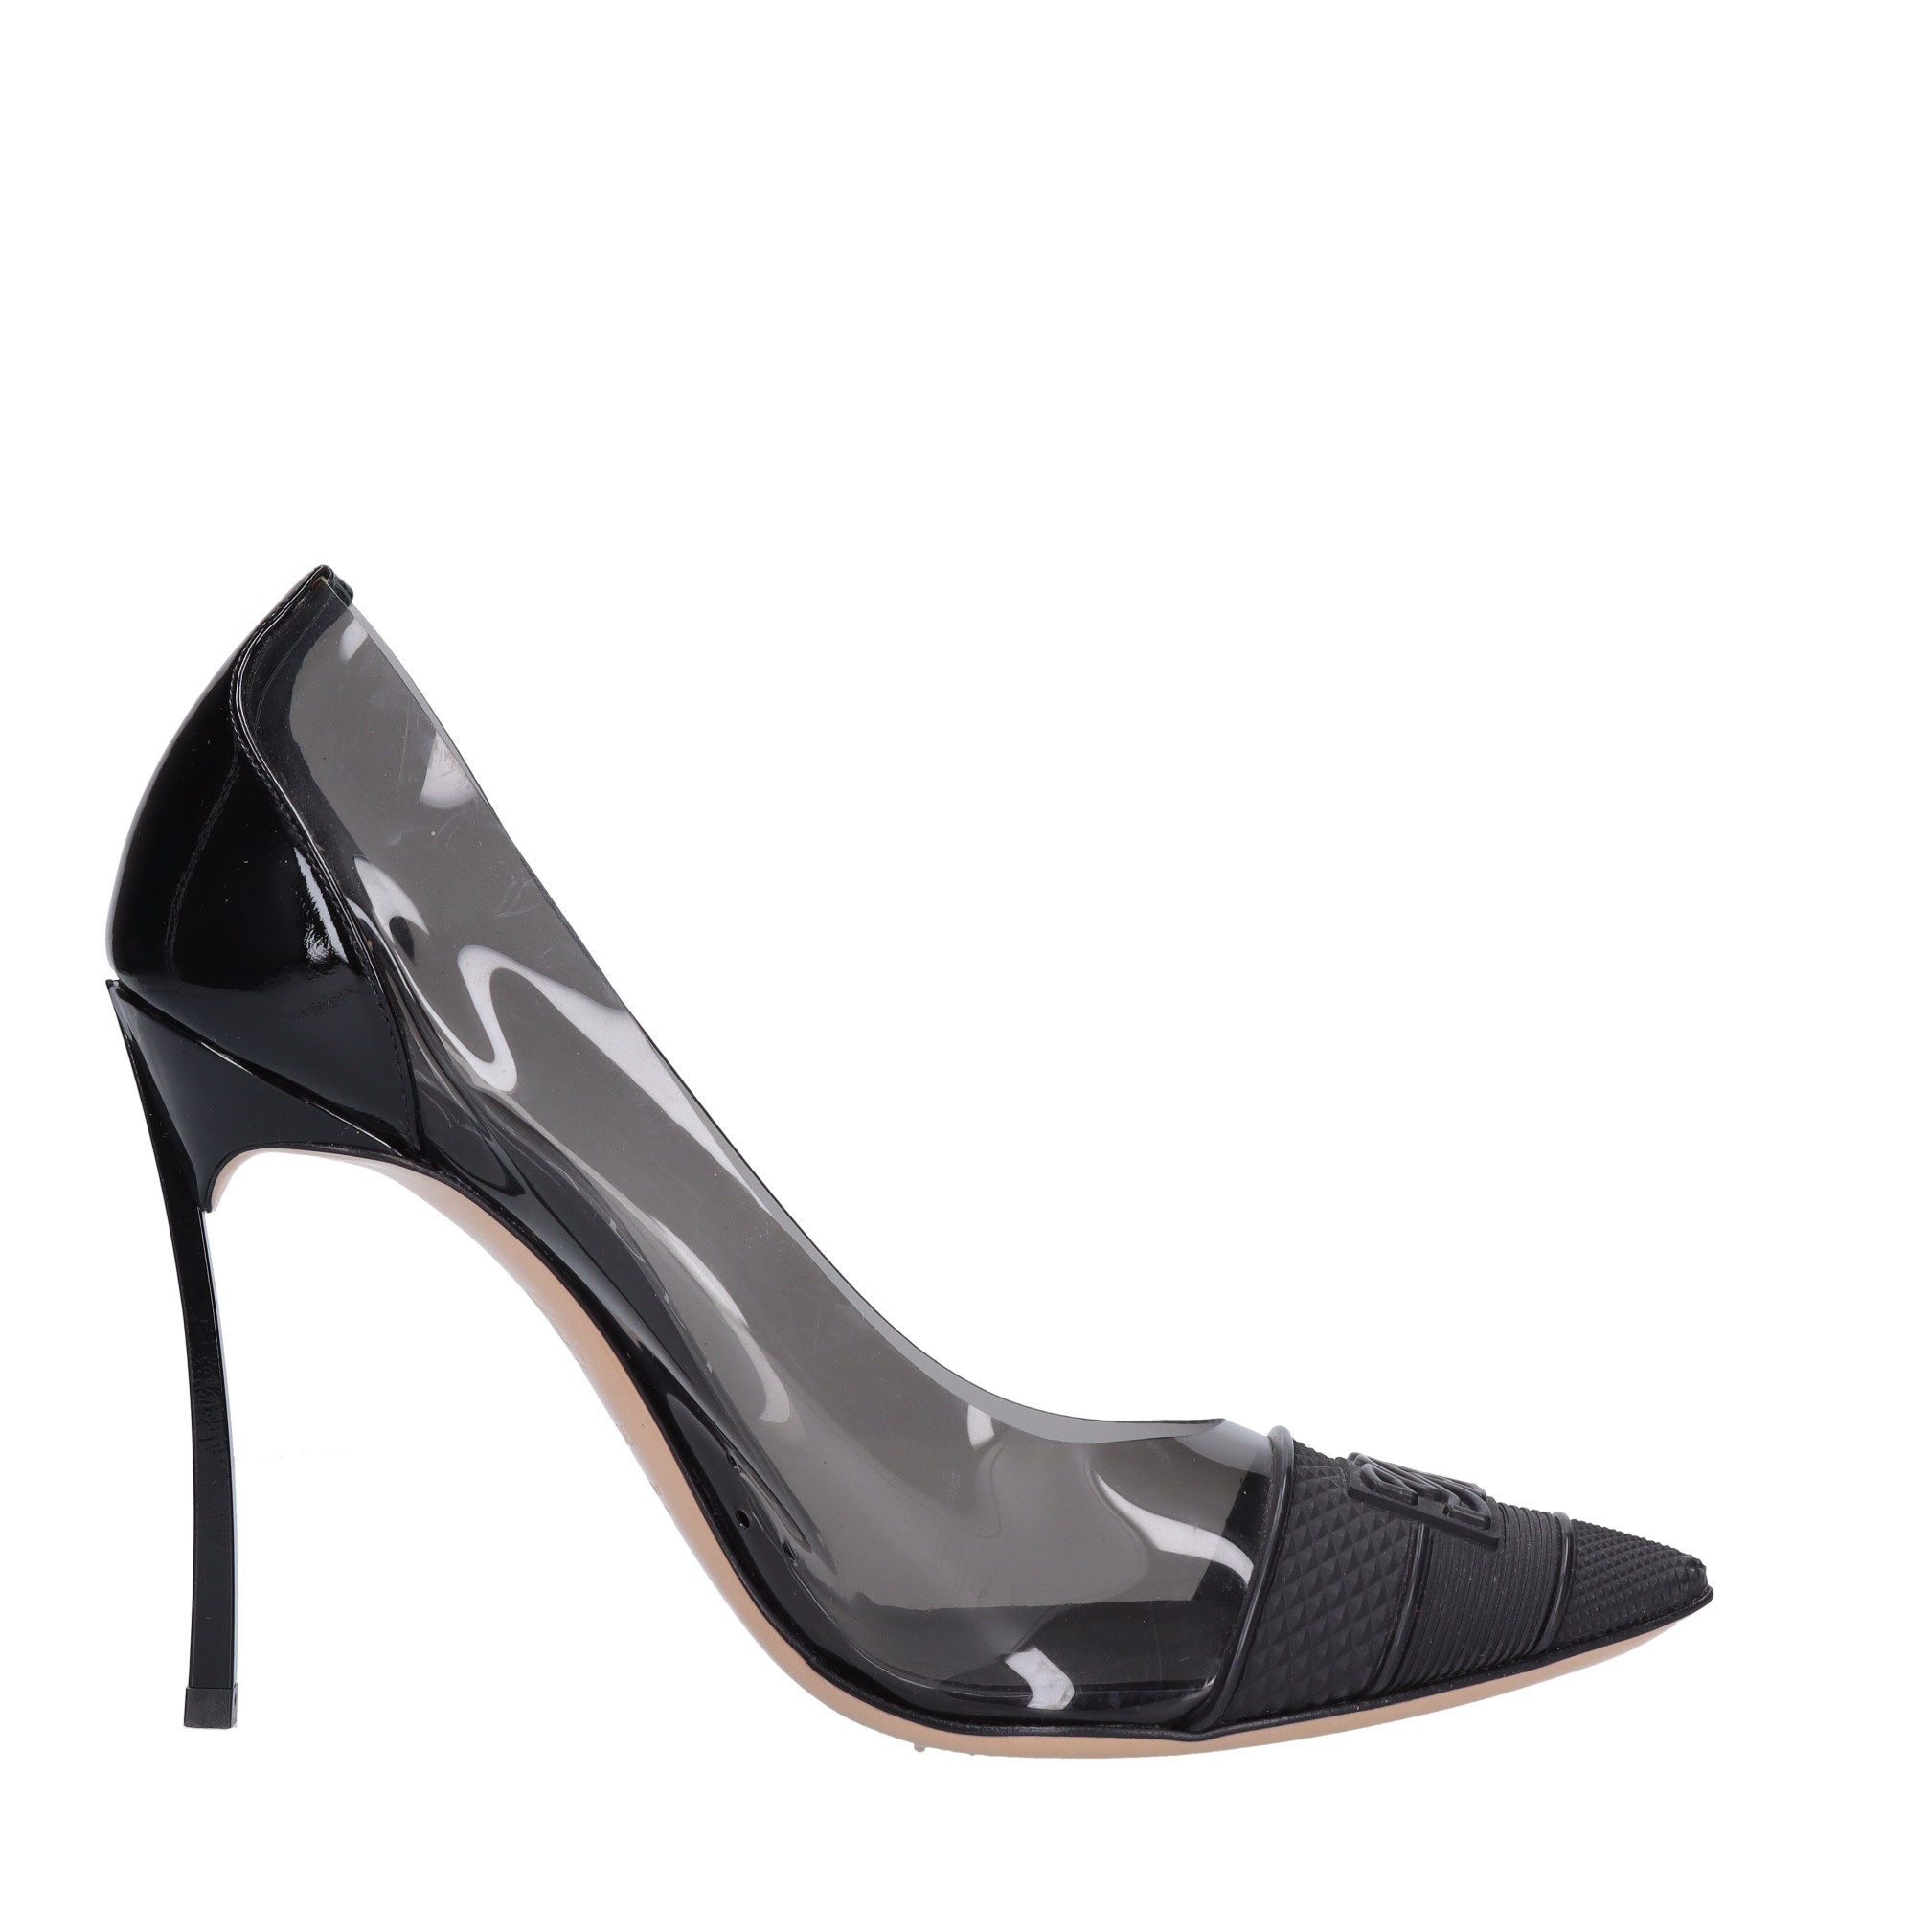 Leather and plexy Blade pumps - CASADEI - Ginevra calzature